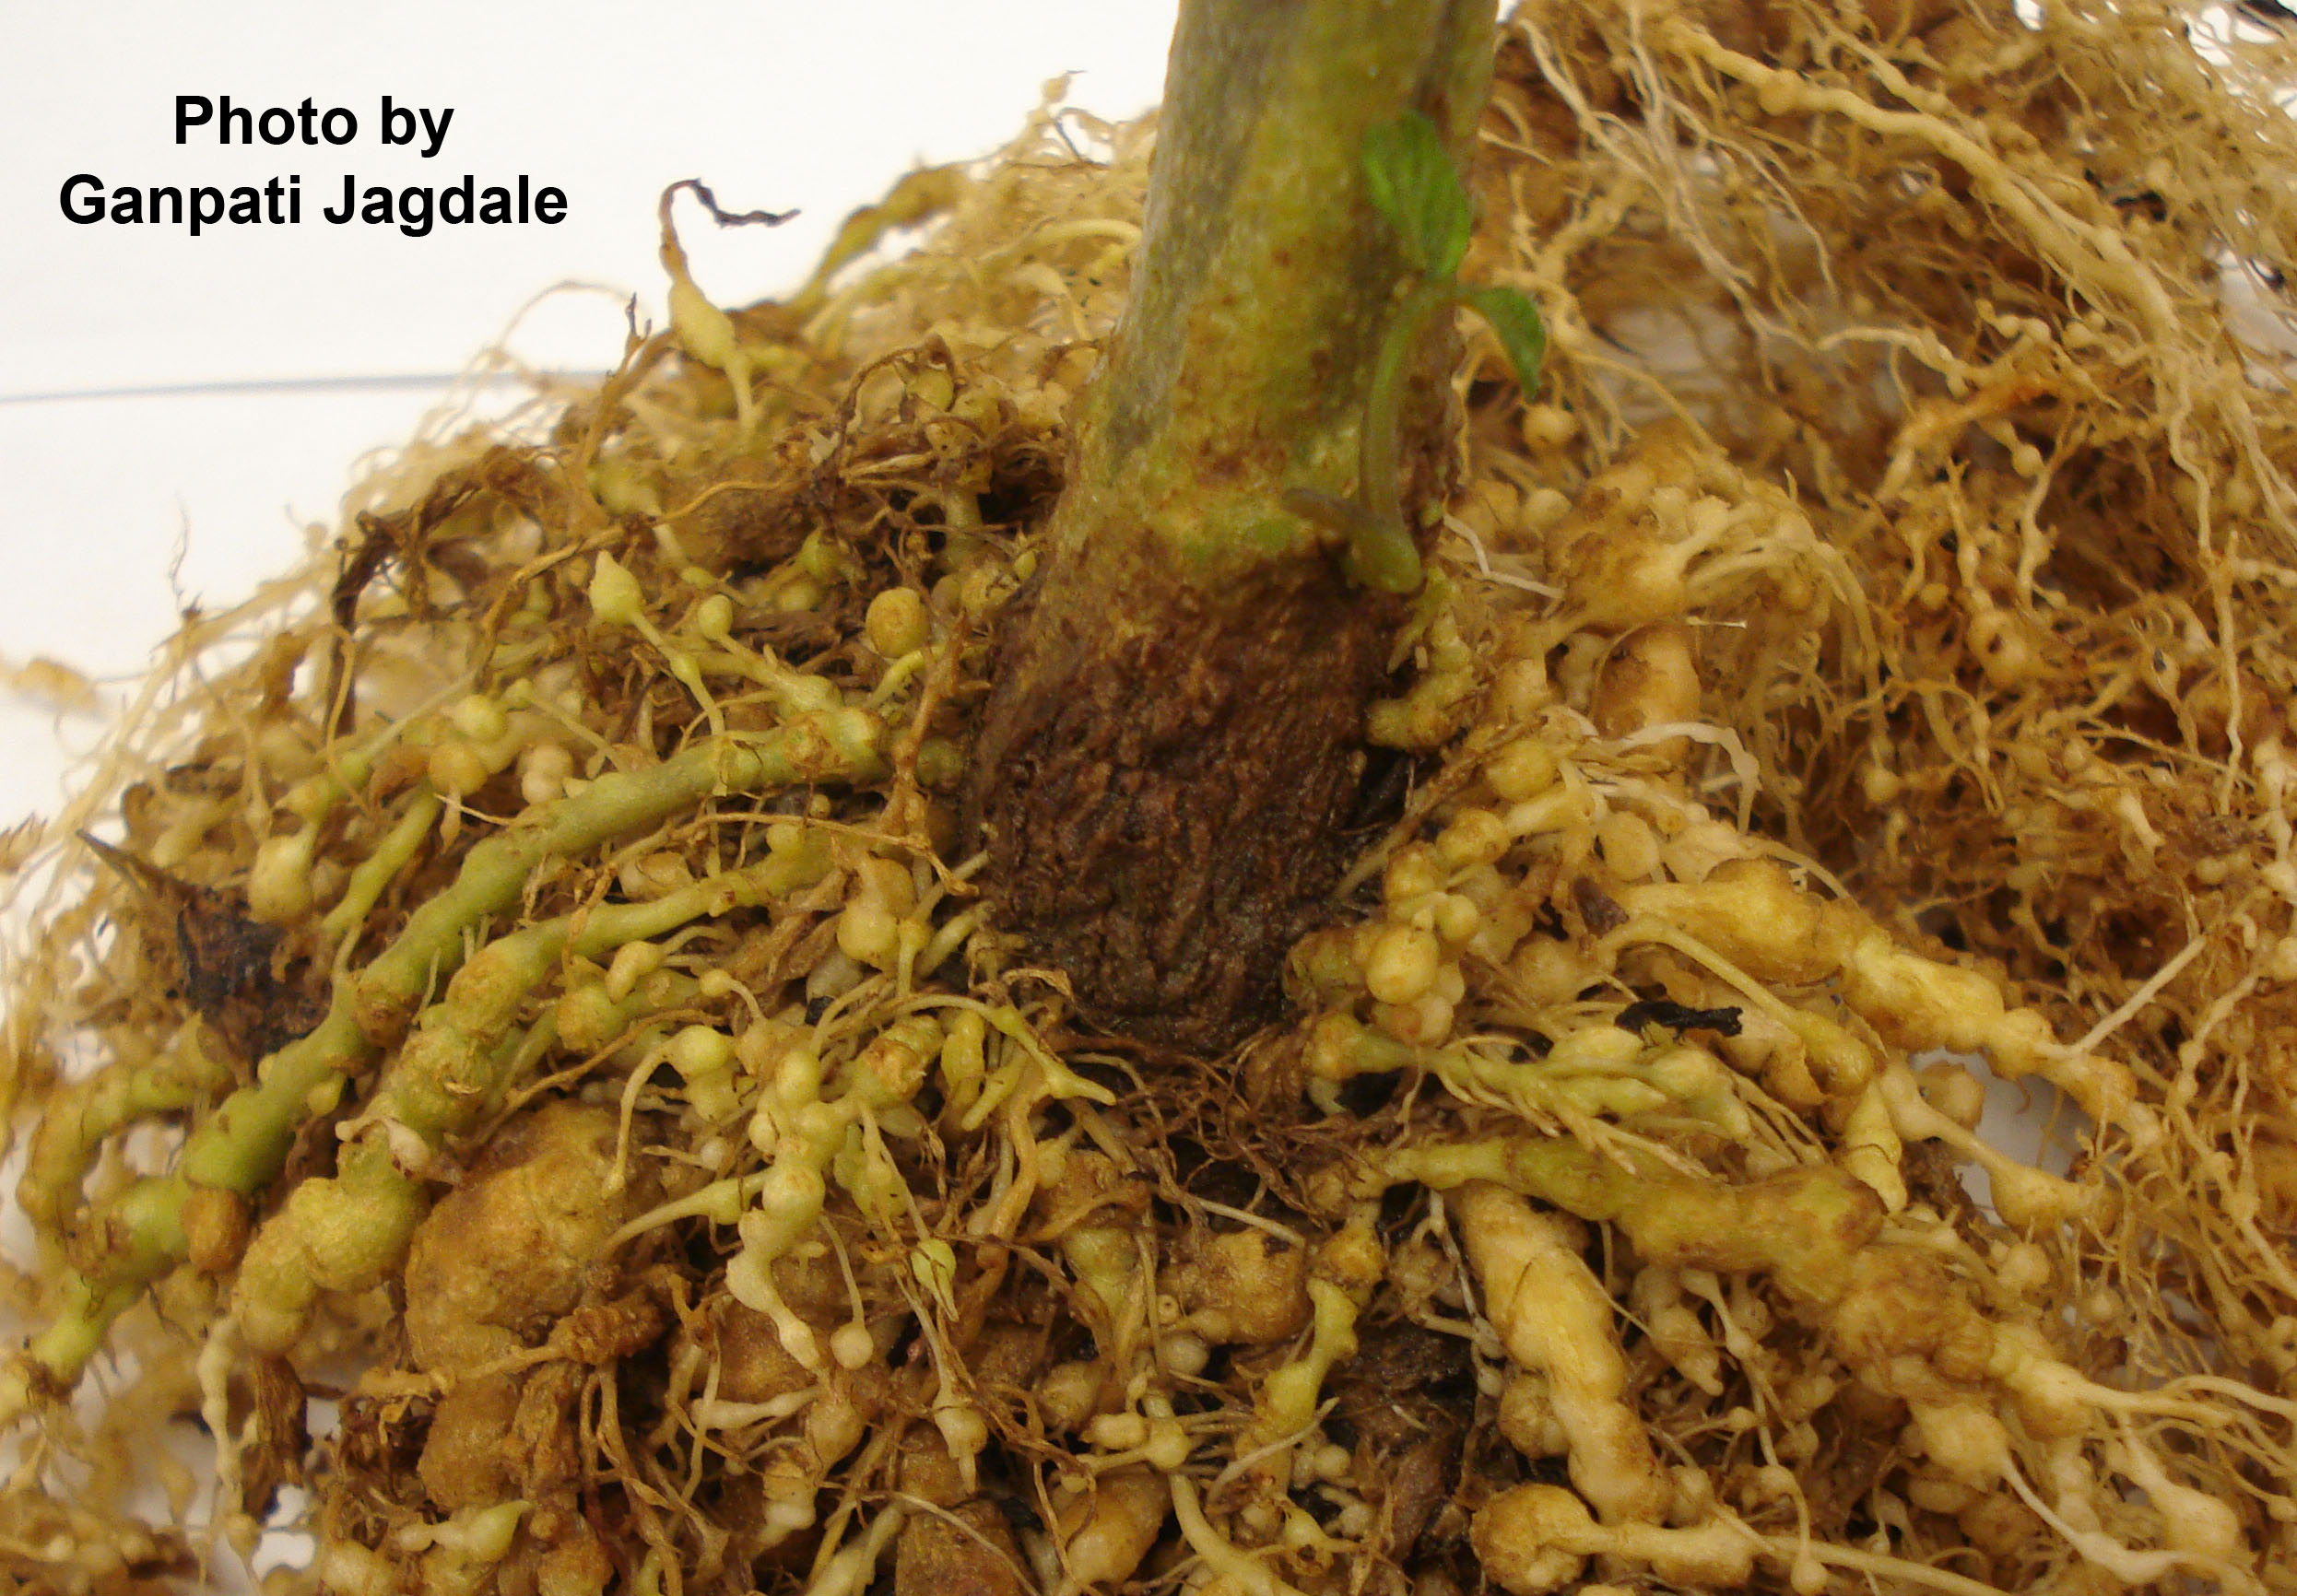 Southern root-knot nematode in soybean: Risks and control options, Education